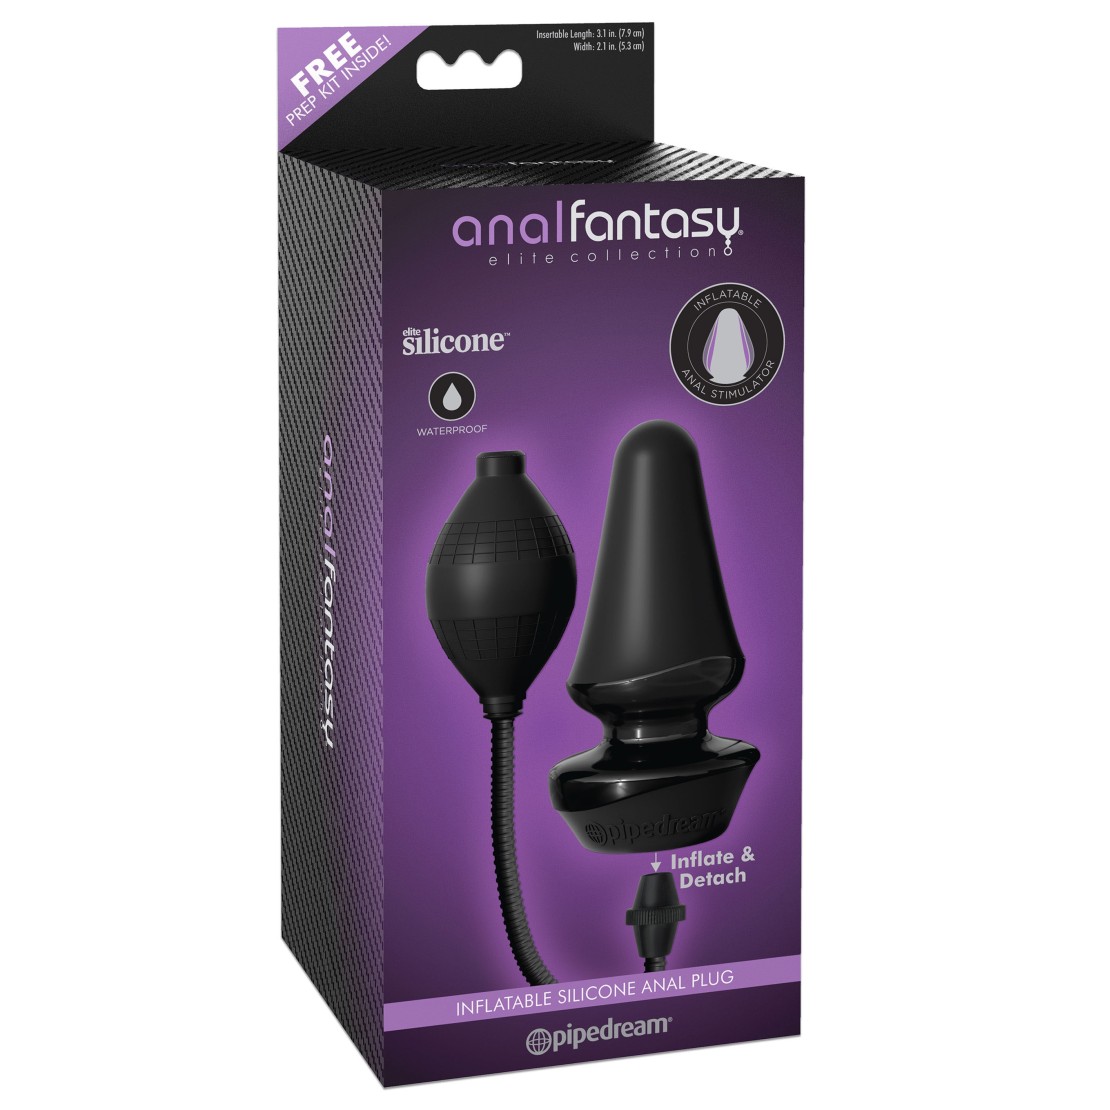 PLUG ANALE IN SILICONE SEX TOY GONFIABILE ANALFANTASY